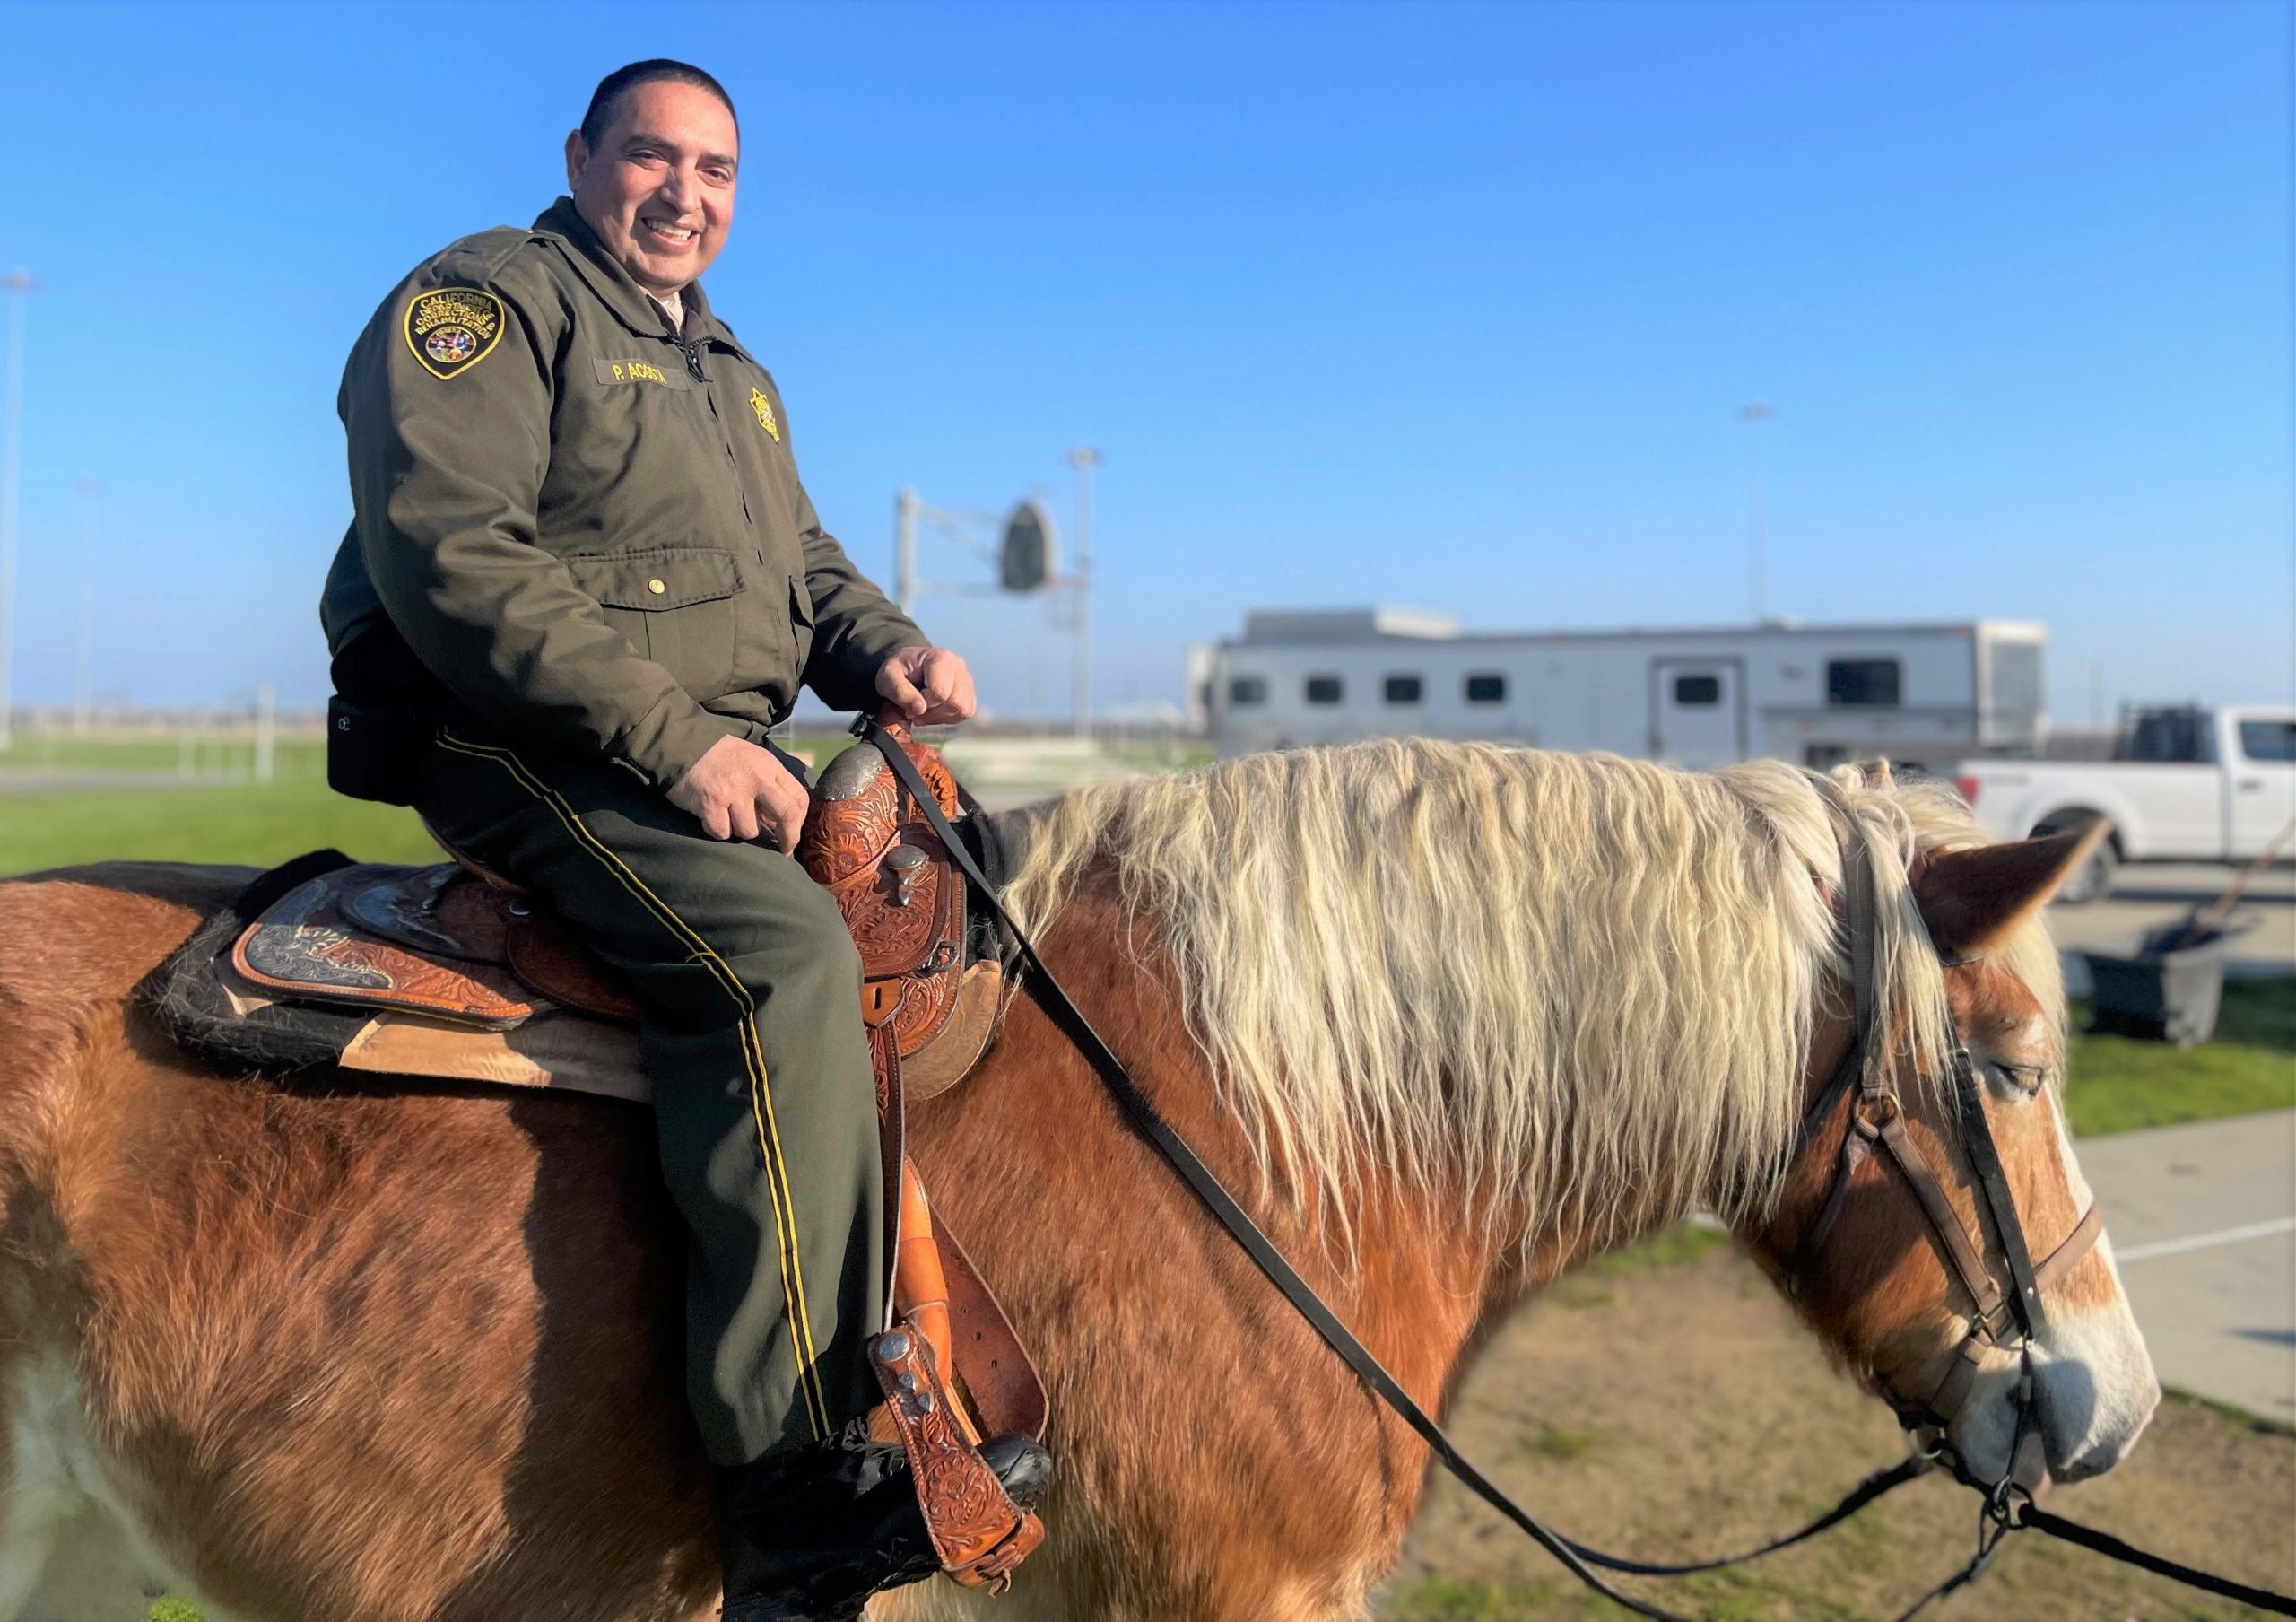 Valley State Prison lieutenant sits atop a horse.